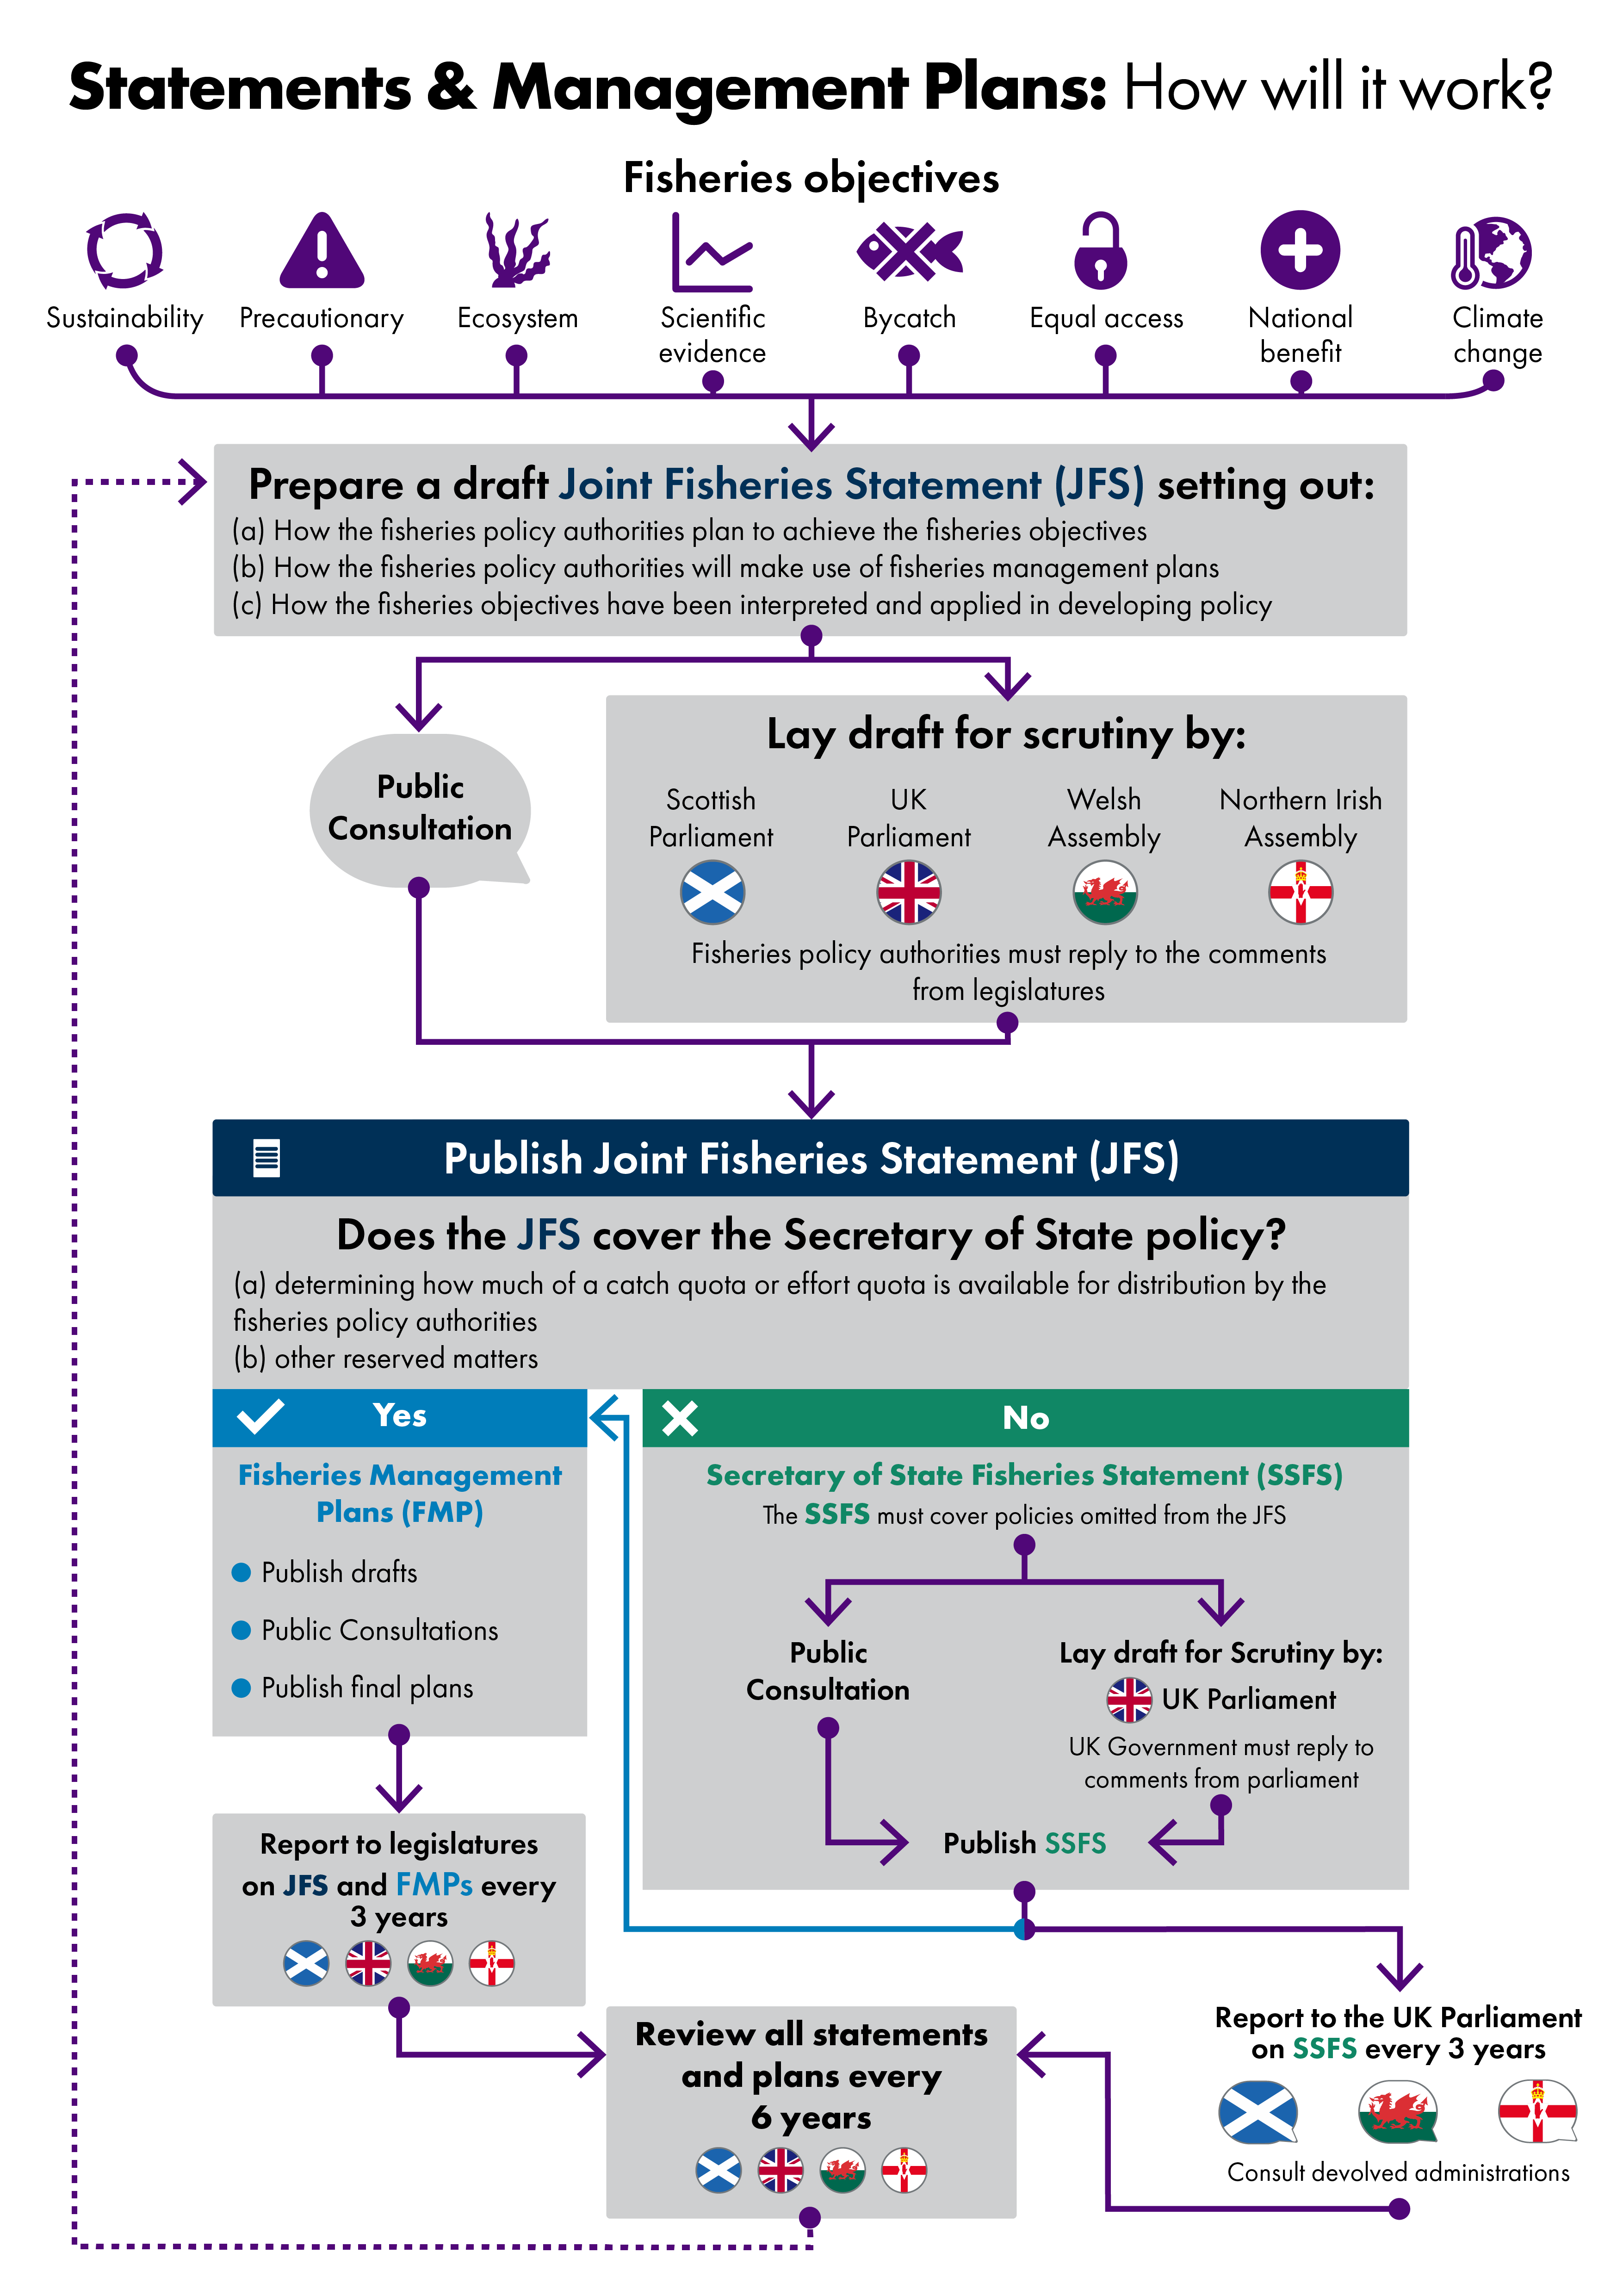 Flow chart setting out the process for Joint Fisheries Statements and Fisheries Management Plans.